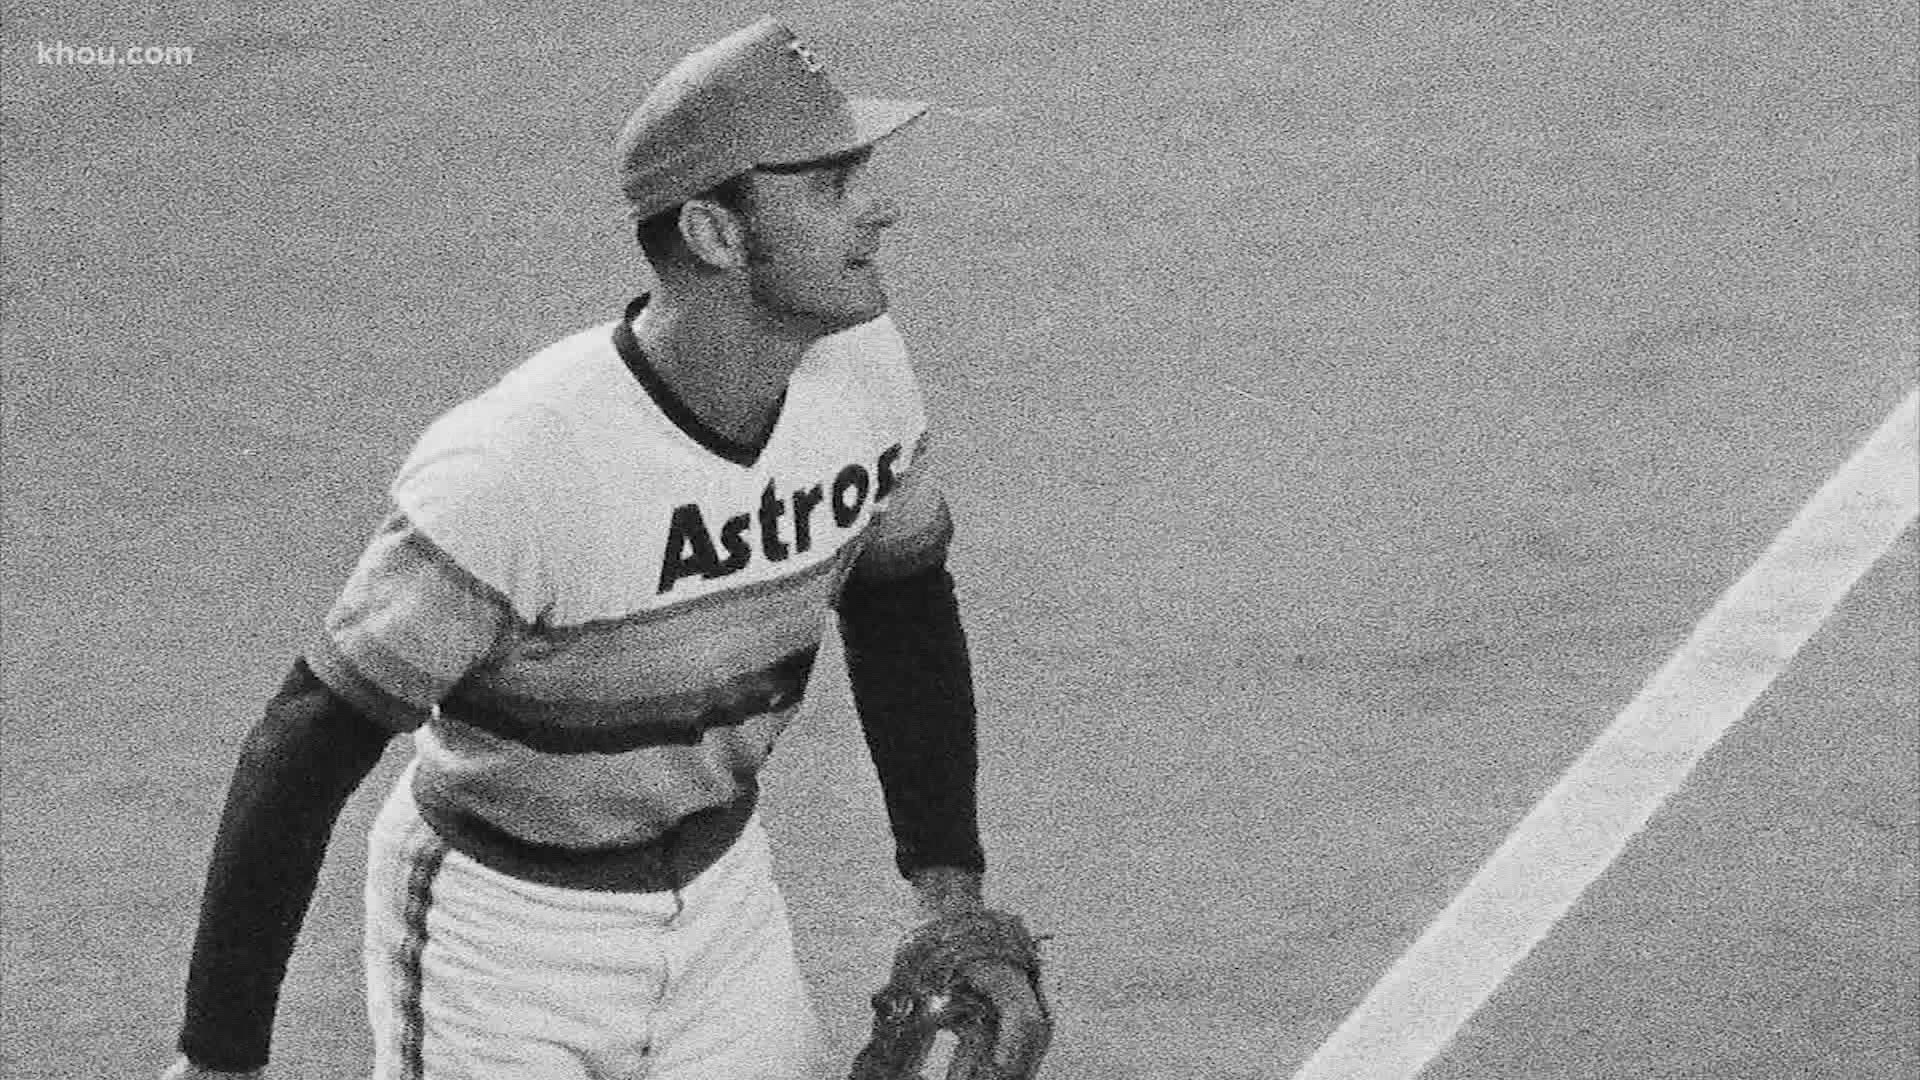 Art Howe, former Houston Astros third baseman and manager, has been discharged from the hospital as he battles COVID-19.